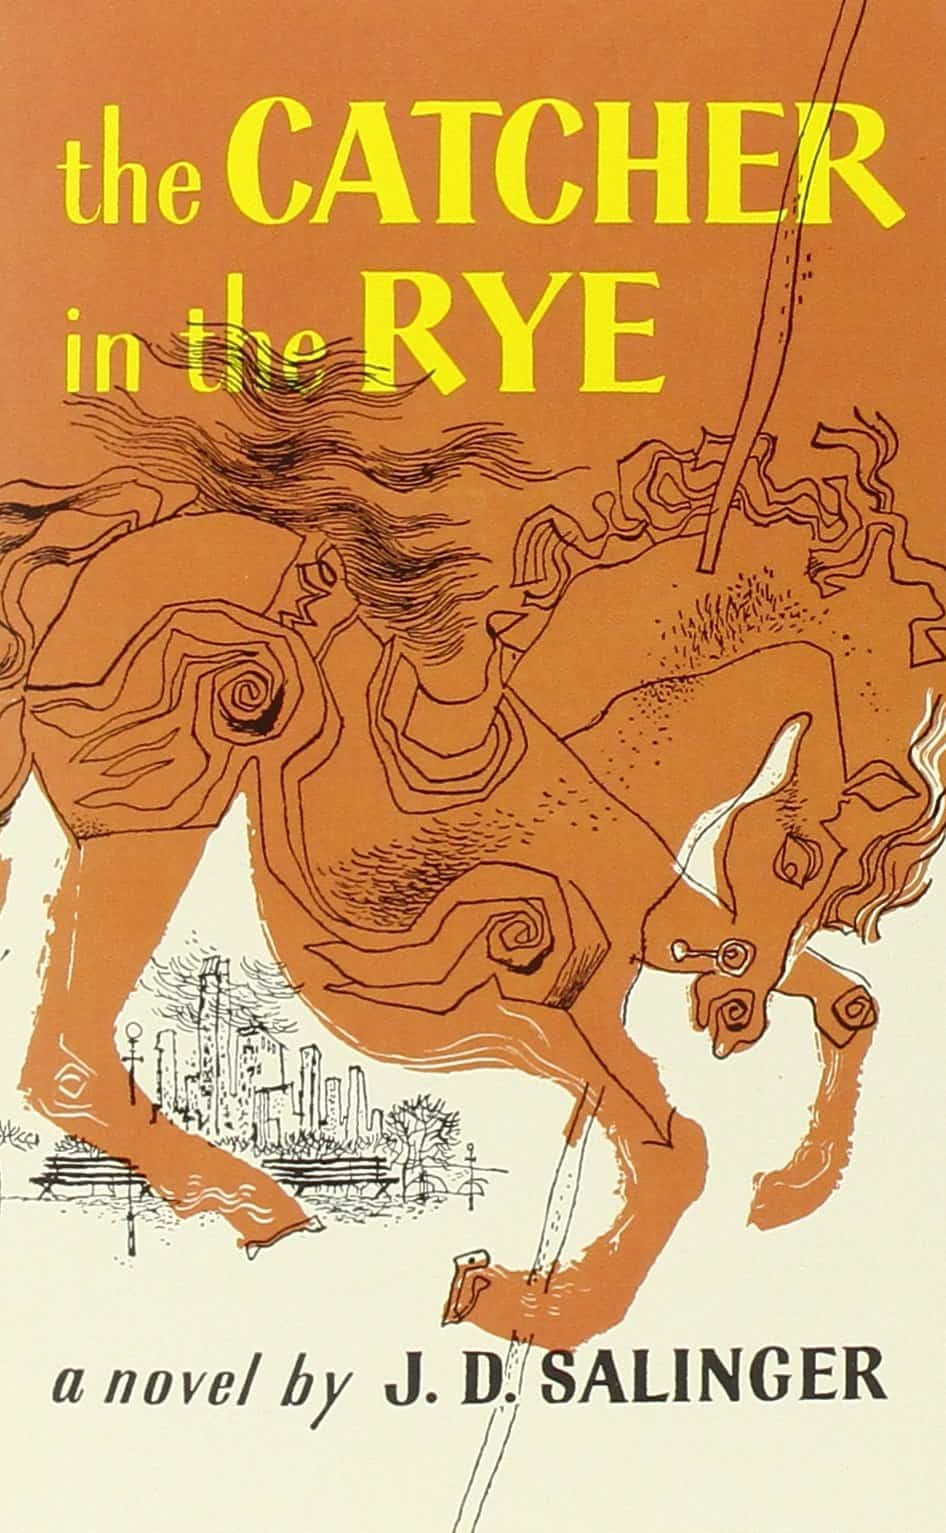 The Catcher in the Rye book